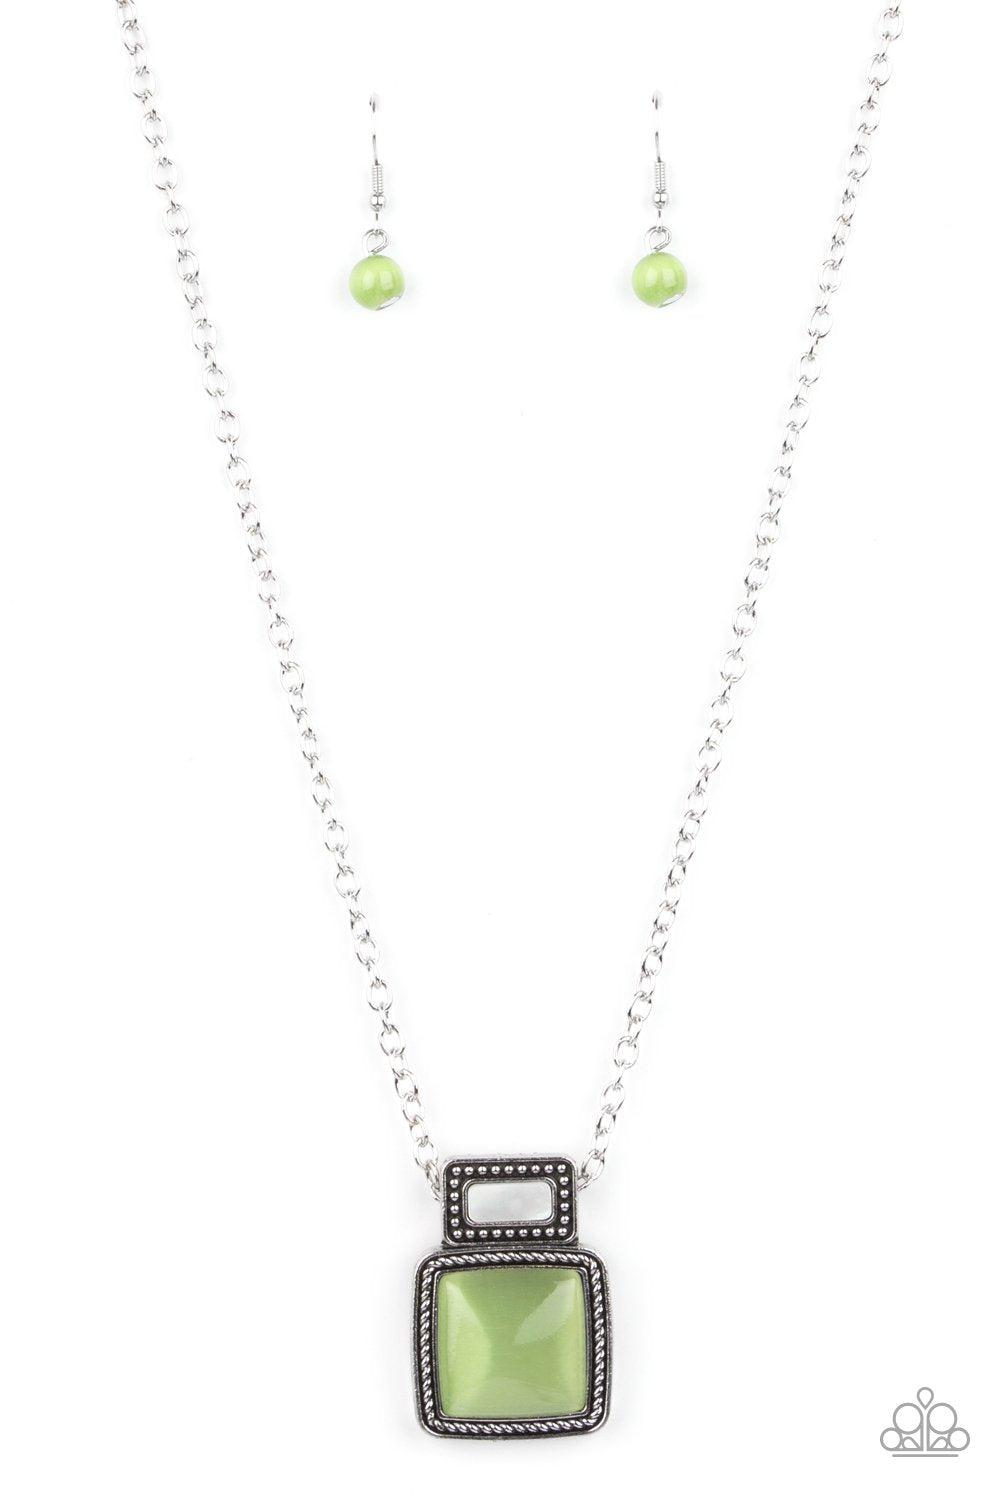 Ethereally Elemental Green Cat's Eye Stone Necklace - Paparazzi Accessories- lightbox - CarasShop.com - $5 Jewelry by Cara Jewels